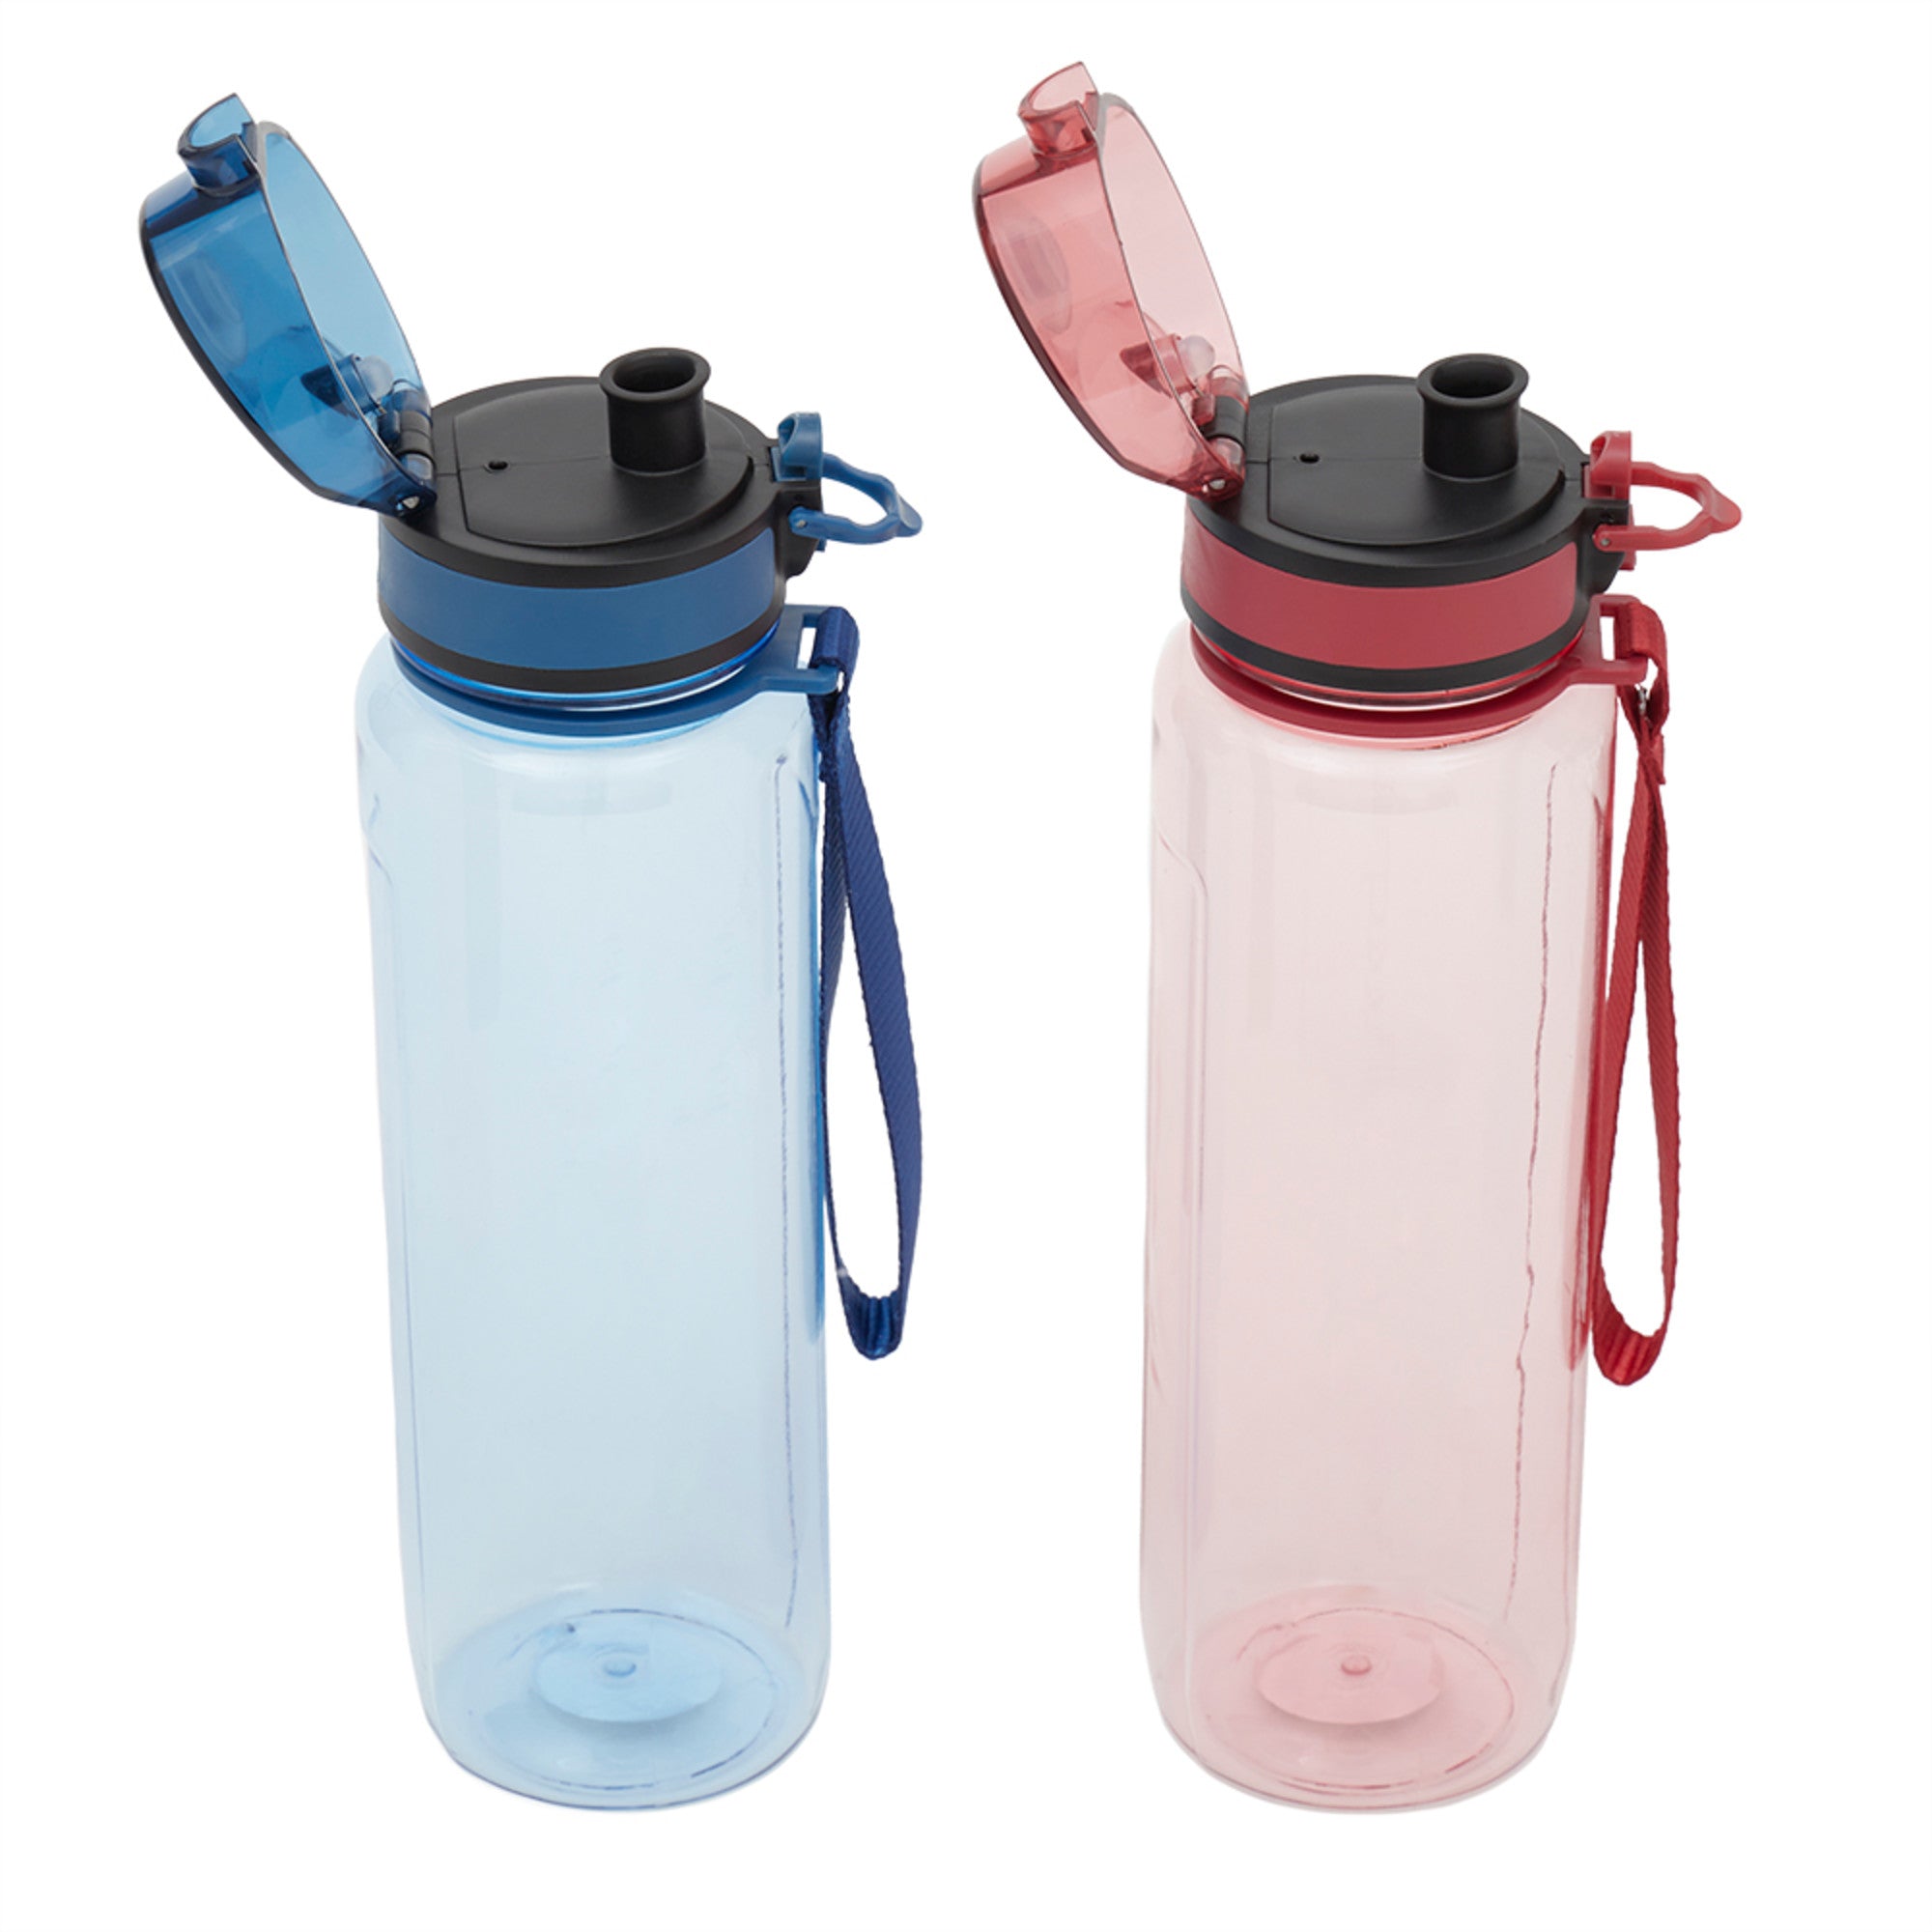 Home Basics 23 oz Plastic Water Bottle with Strap - Assorted Colors